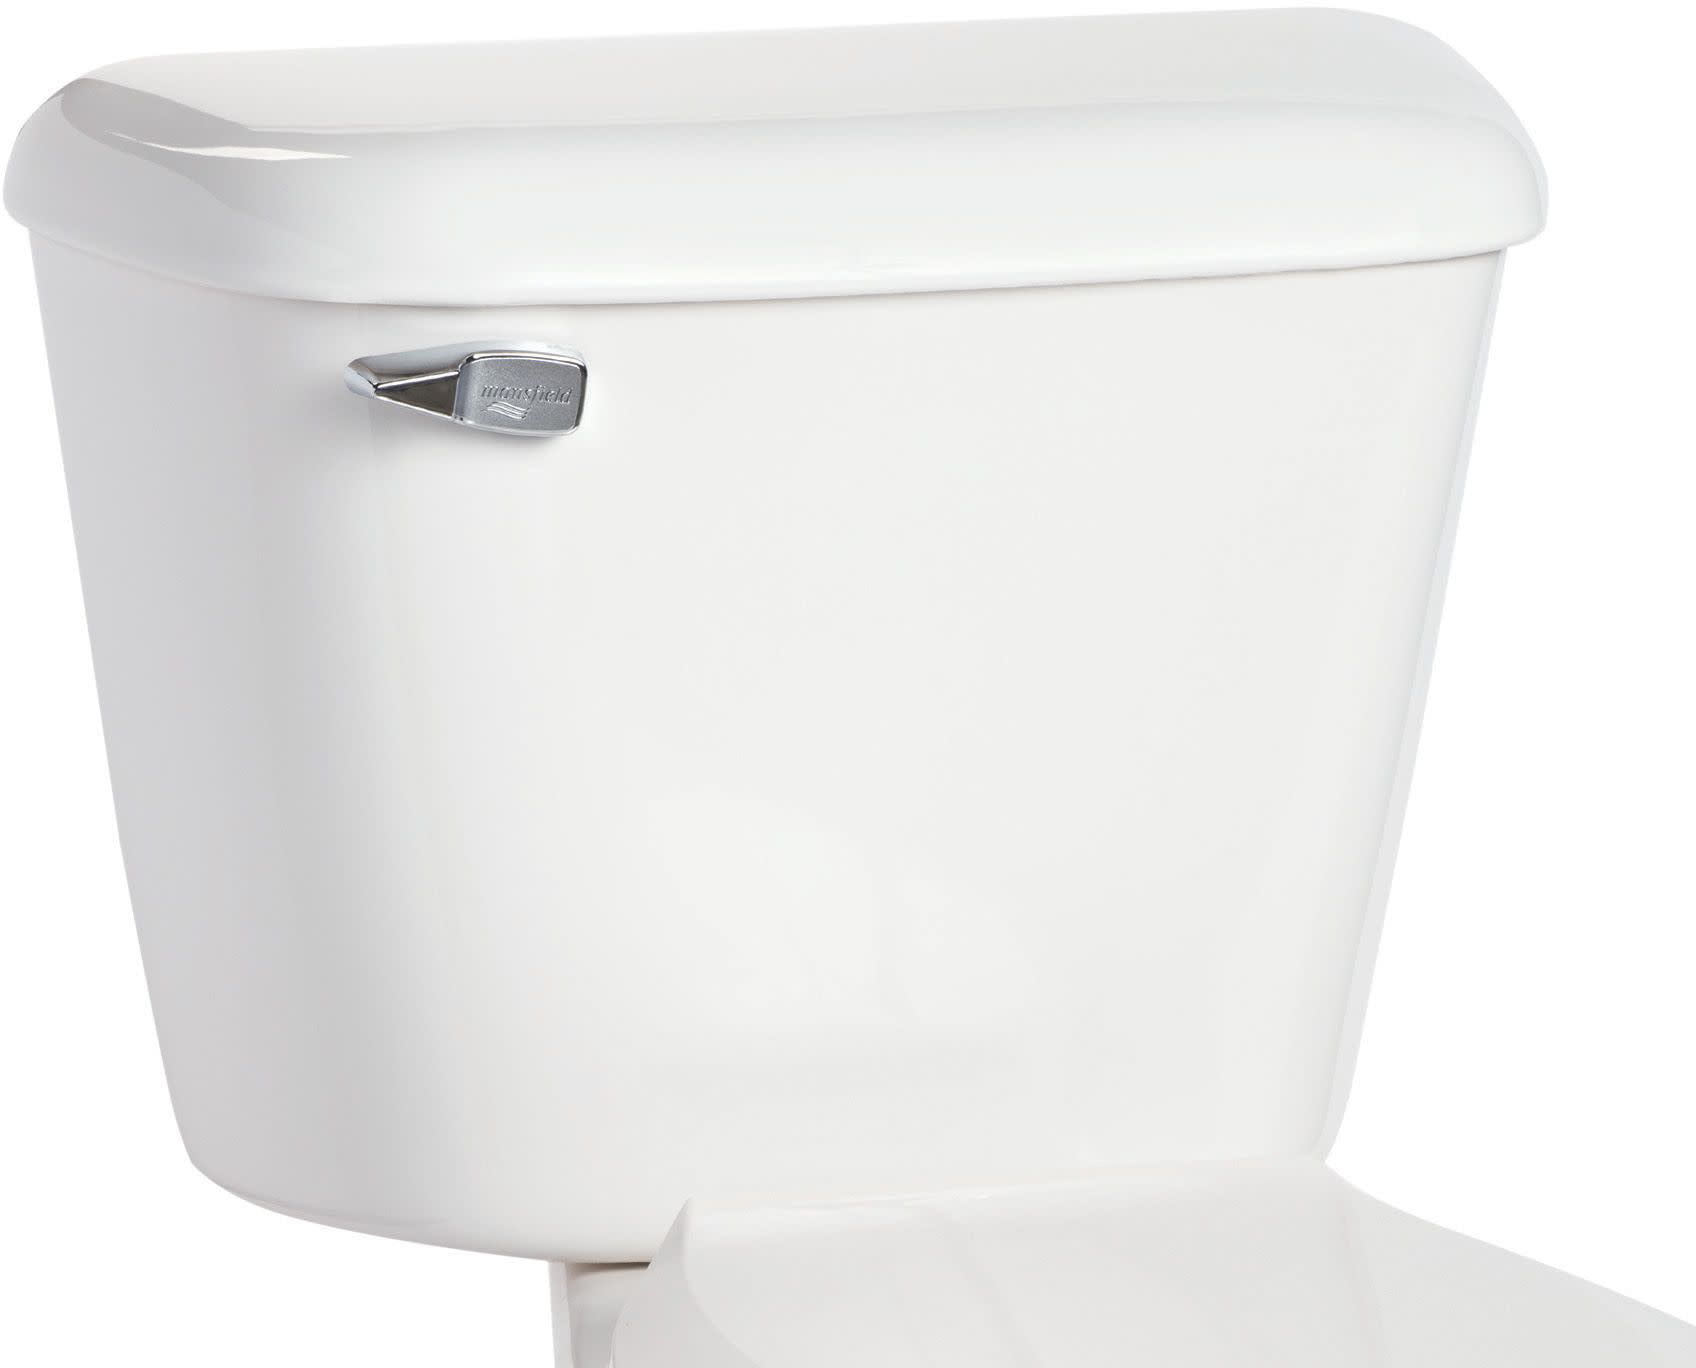 PROFLO PF9812WH PROFLO PF9812 Ultra High Efficiency 0.8 GPM Two-Piece Toilet Tank with 12 Rough 